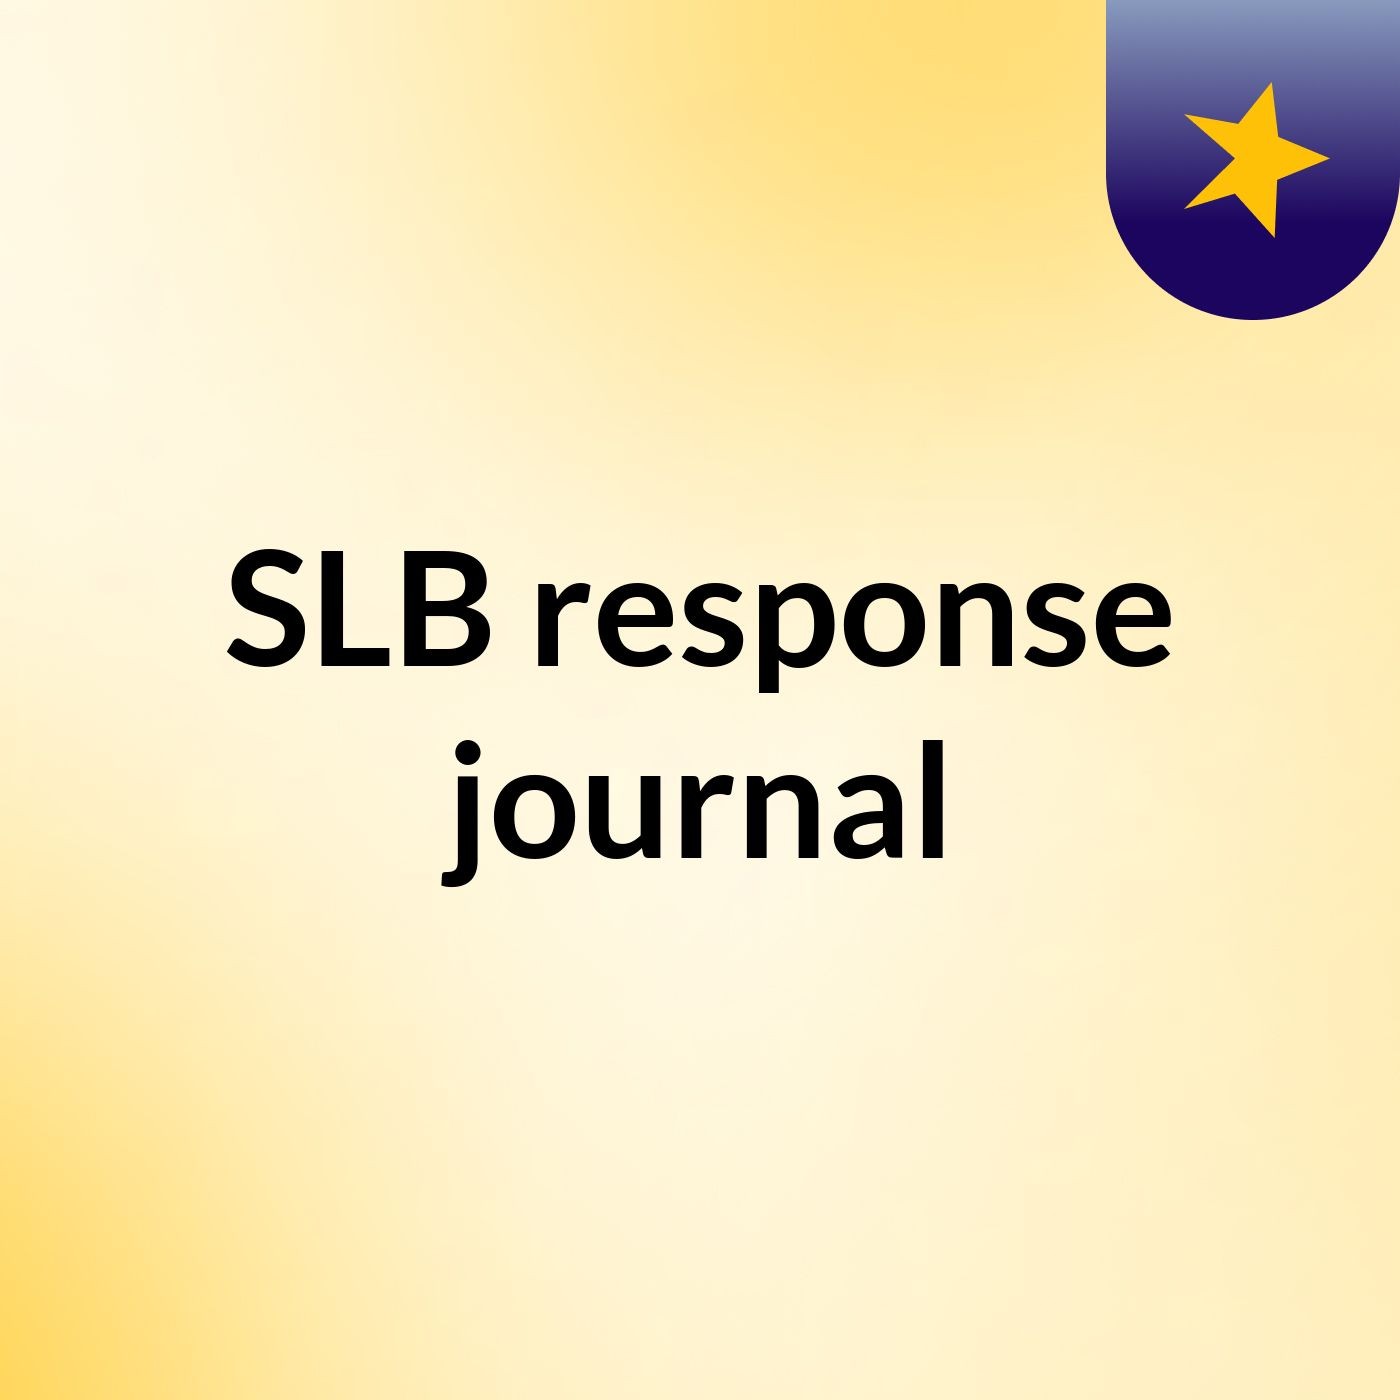 Conclusion - SLB response journal